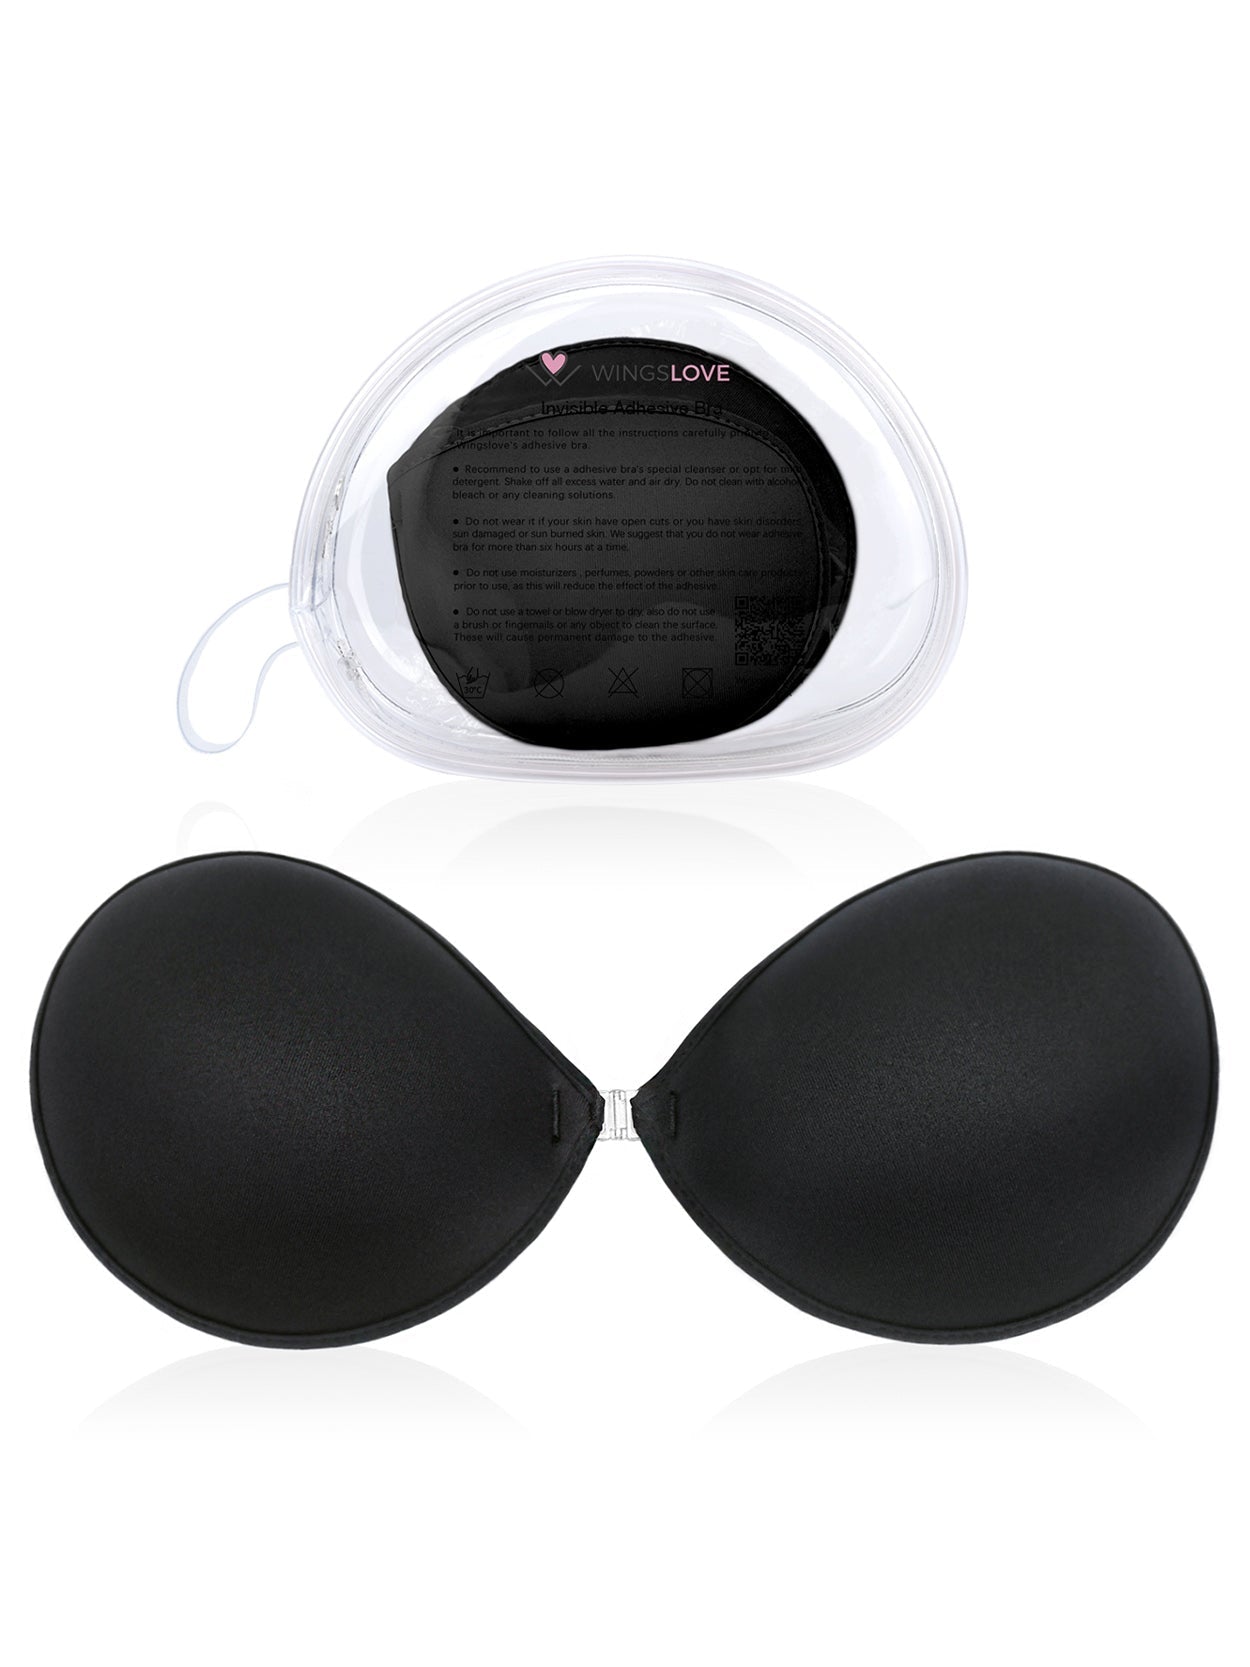 Buy Adhesive Silicone Bra Cup B online